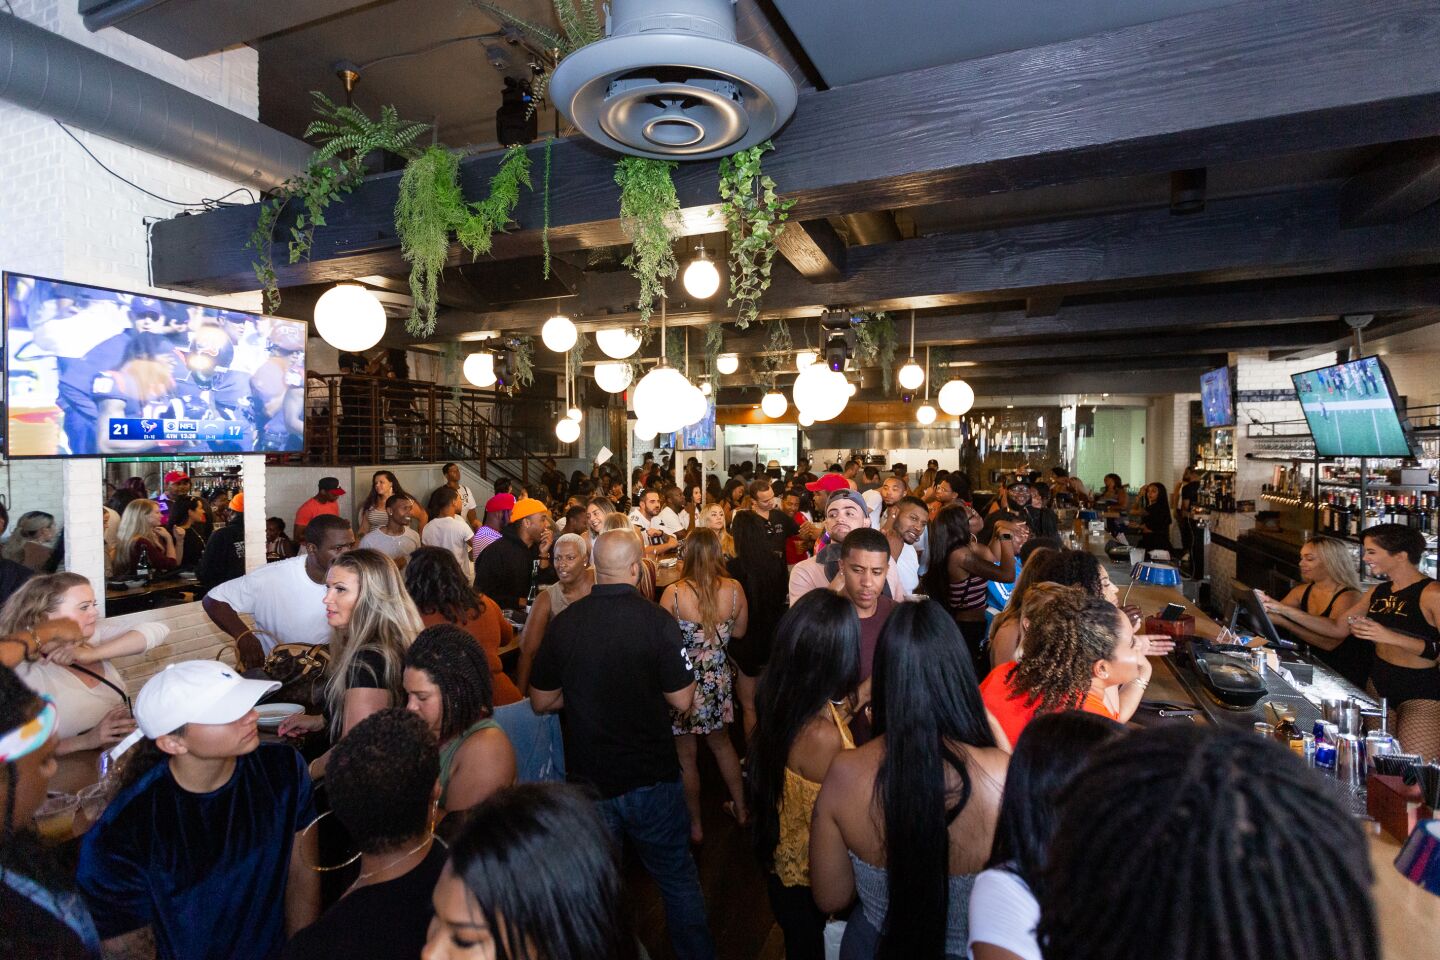 The bottomless mimosas flowed as a DJ spun tunes at Brunch is Life at The Owl Drug Co. in downtown San Diego on Sunday, Sept. 22, 2019.